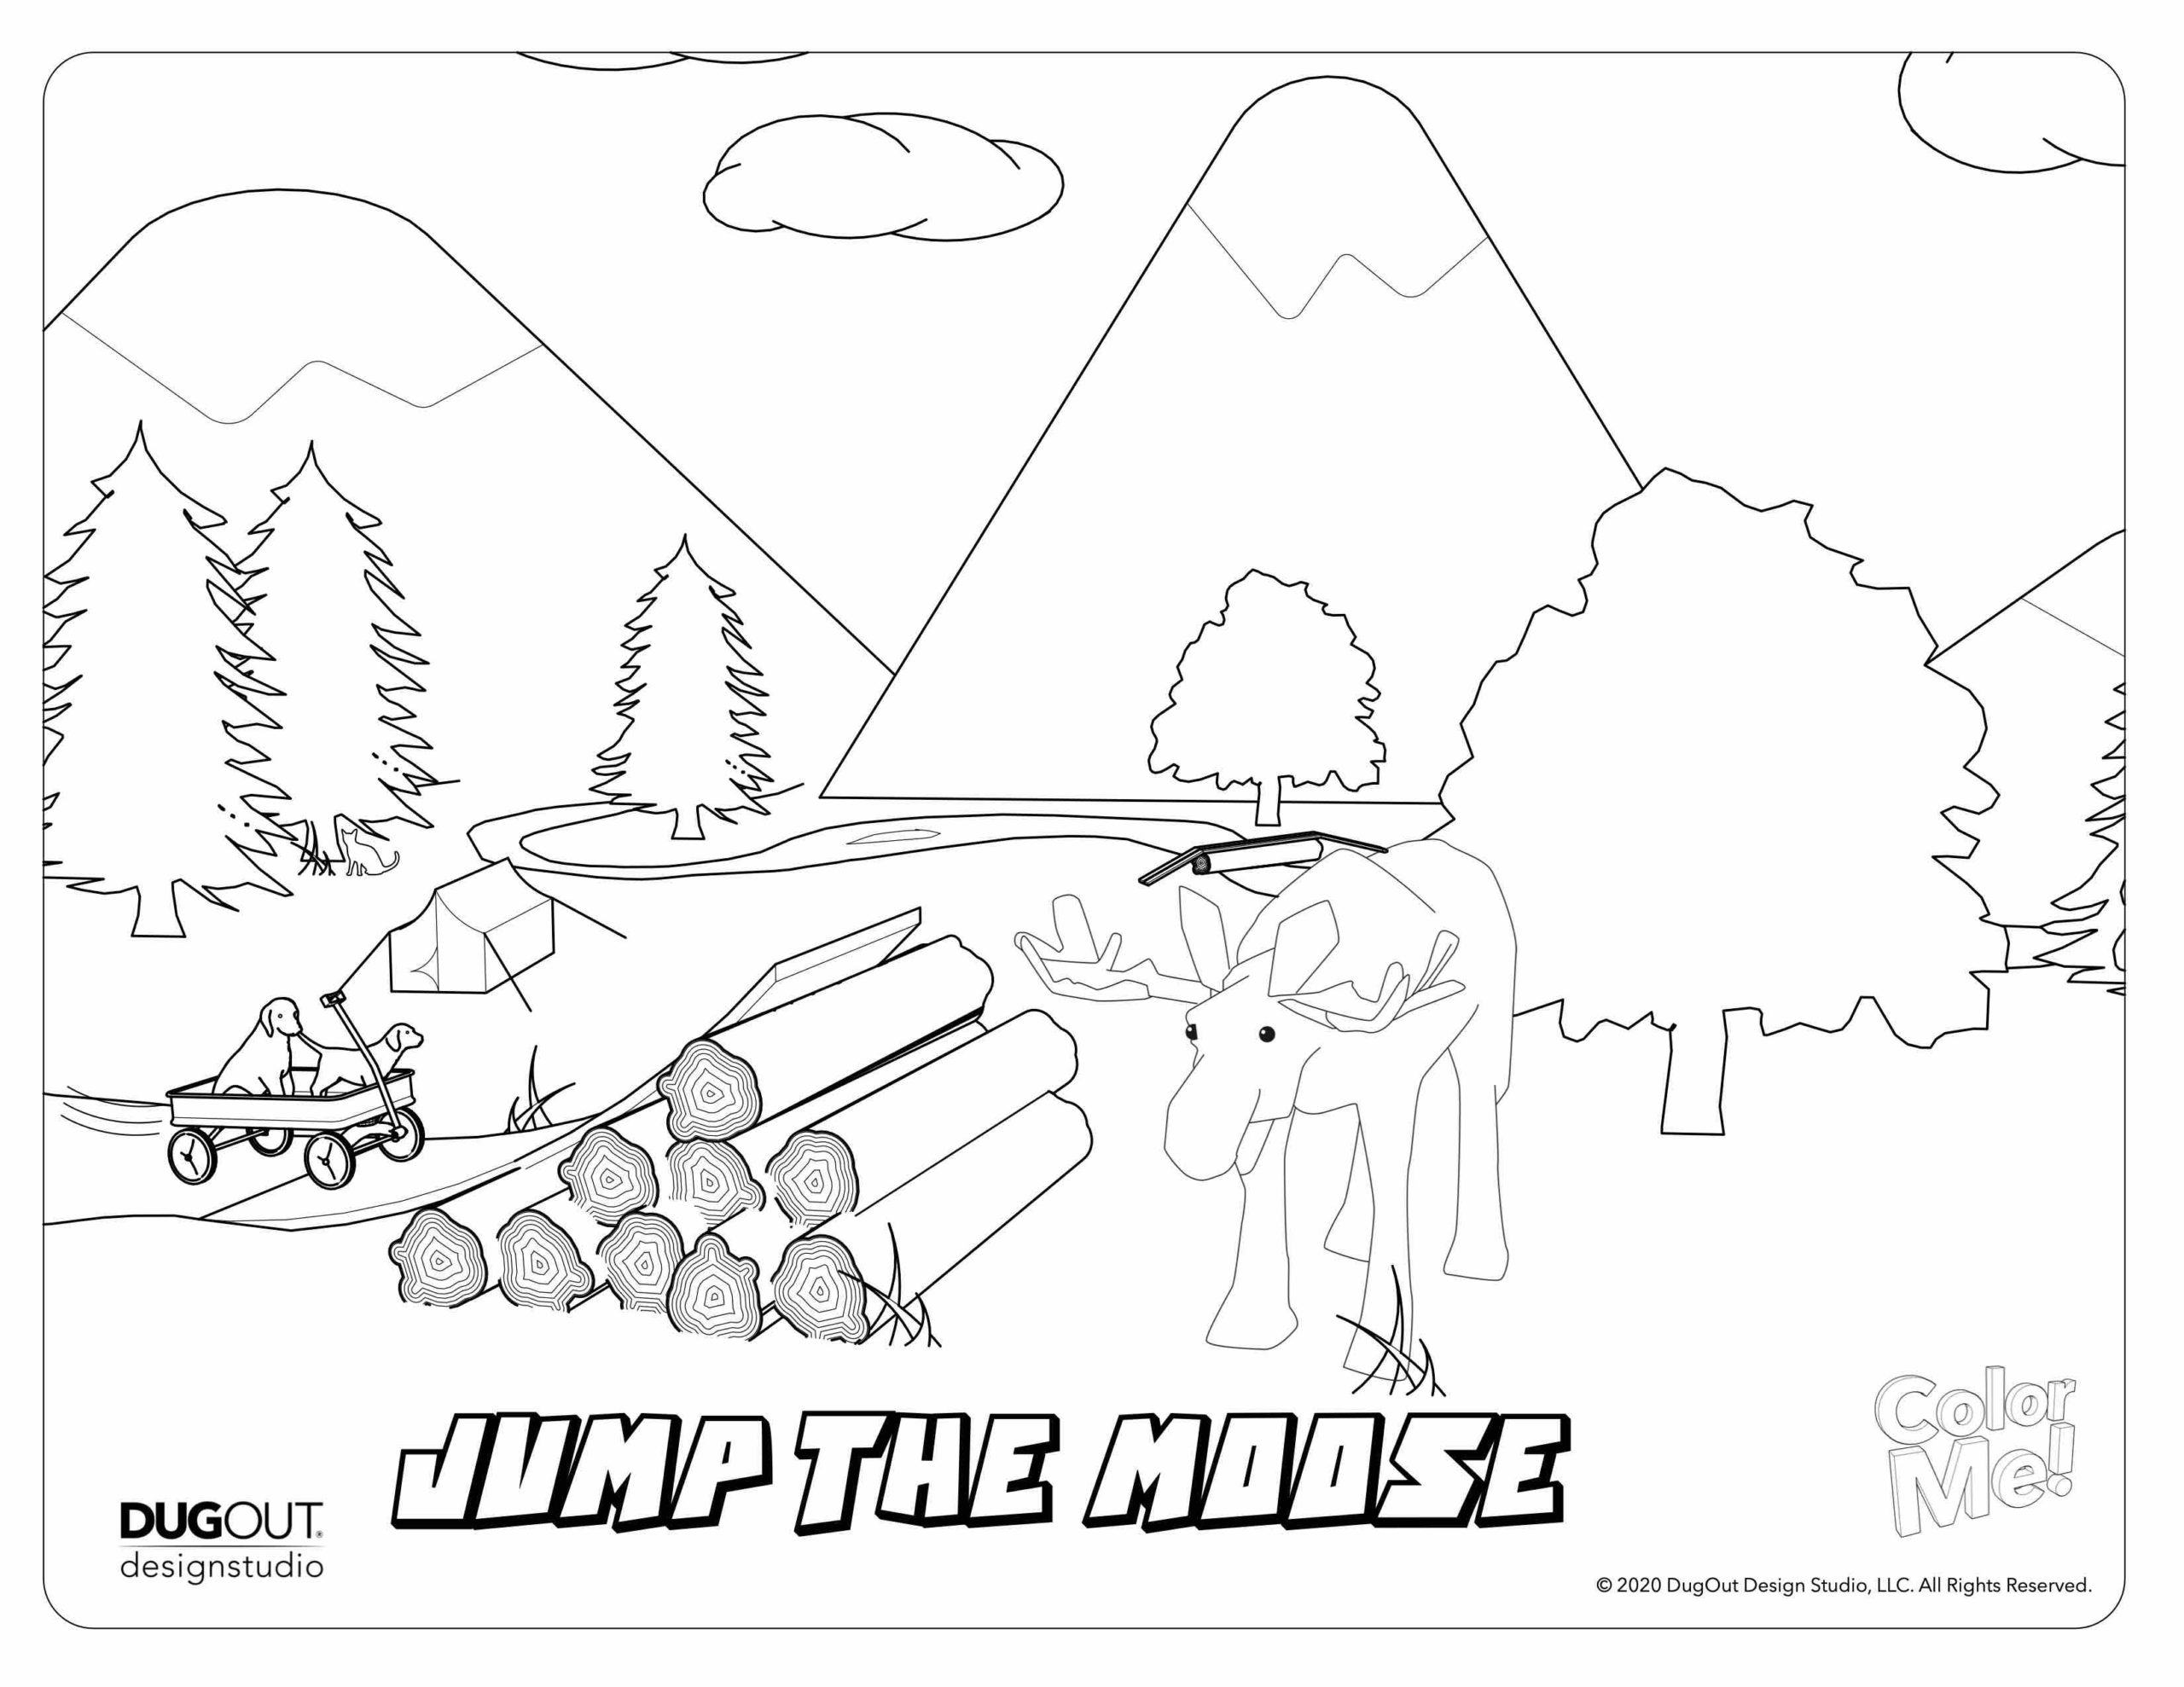 jump the moose coloring page with doggies in wagon